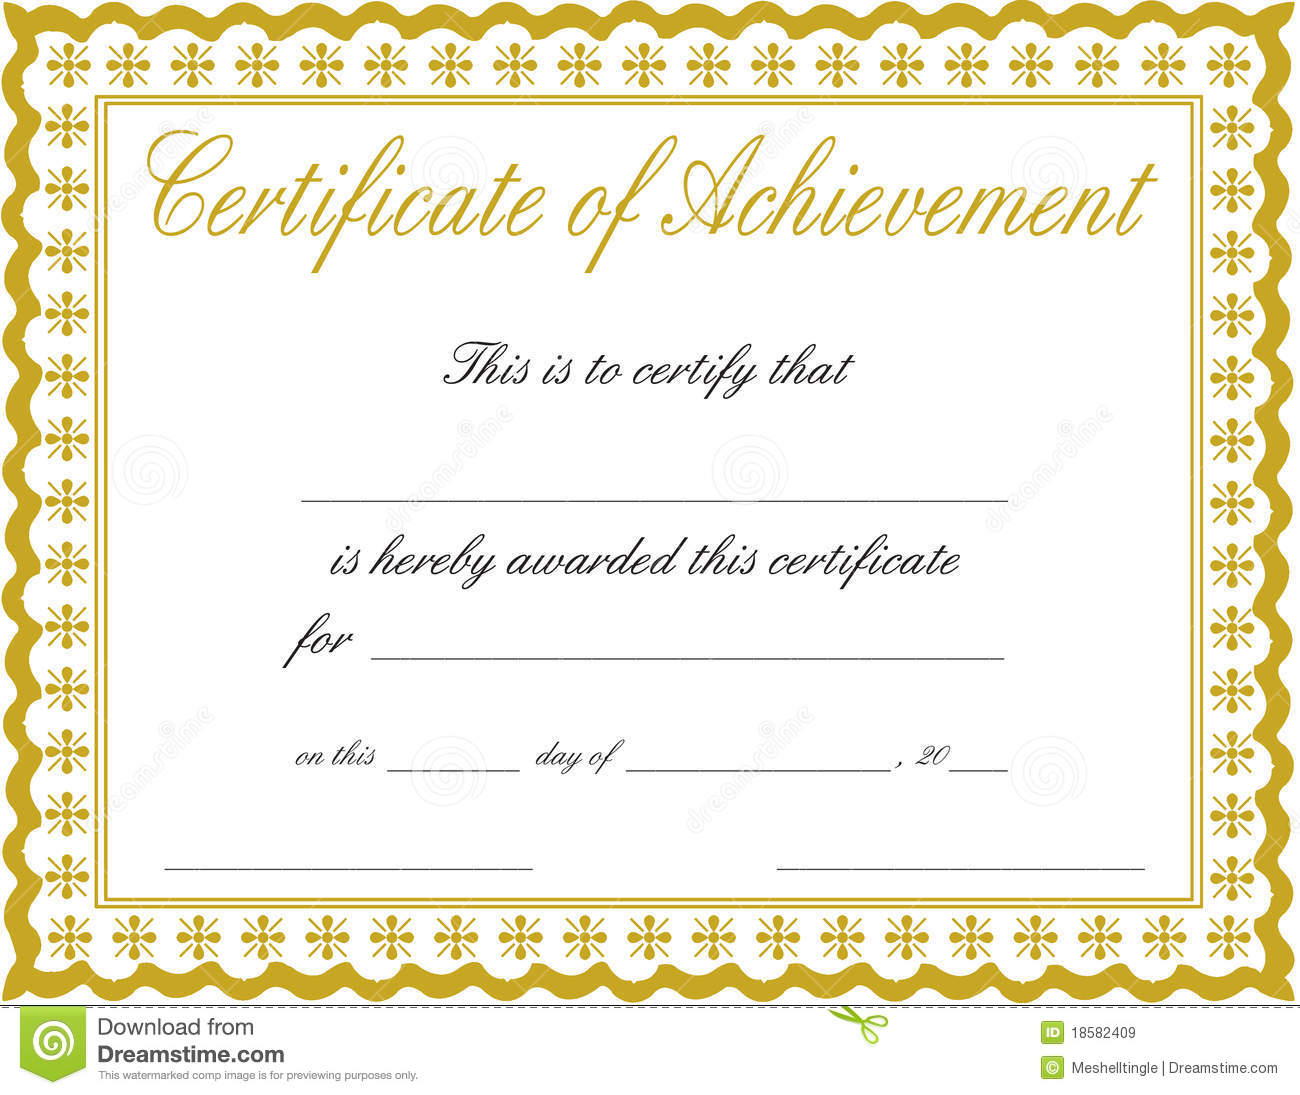 Free Printable Certificate Of Achievement Template | Mult With Regard To Blank Certificate Of Achievement Template